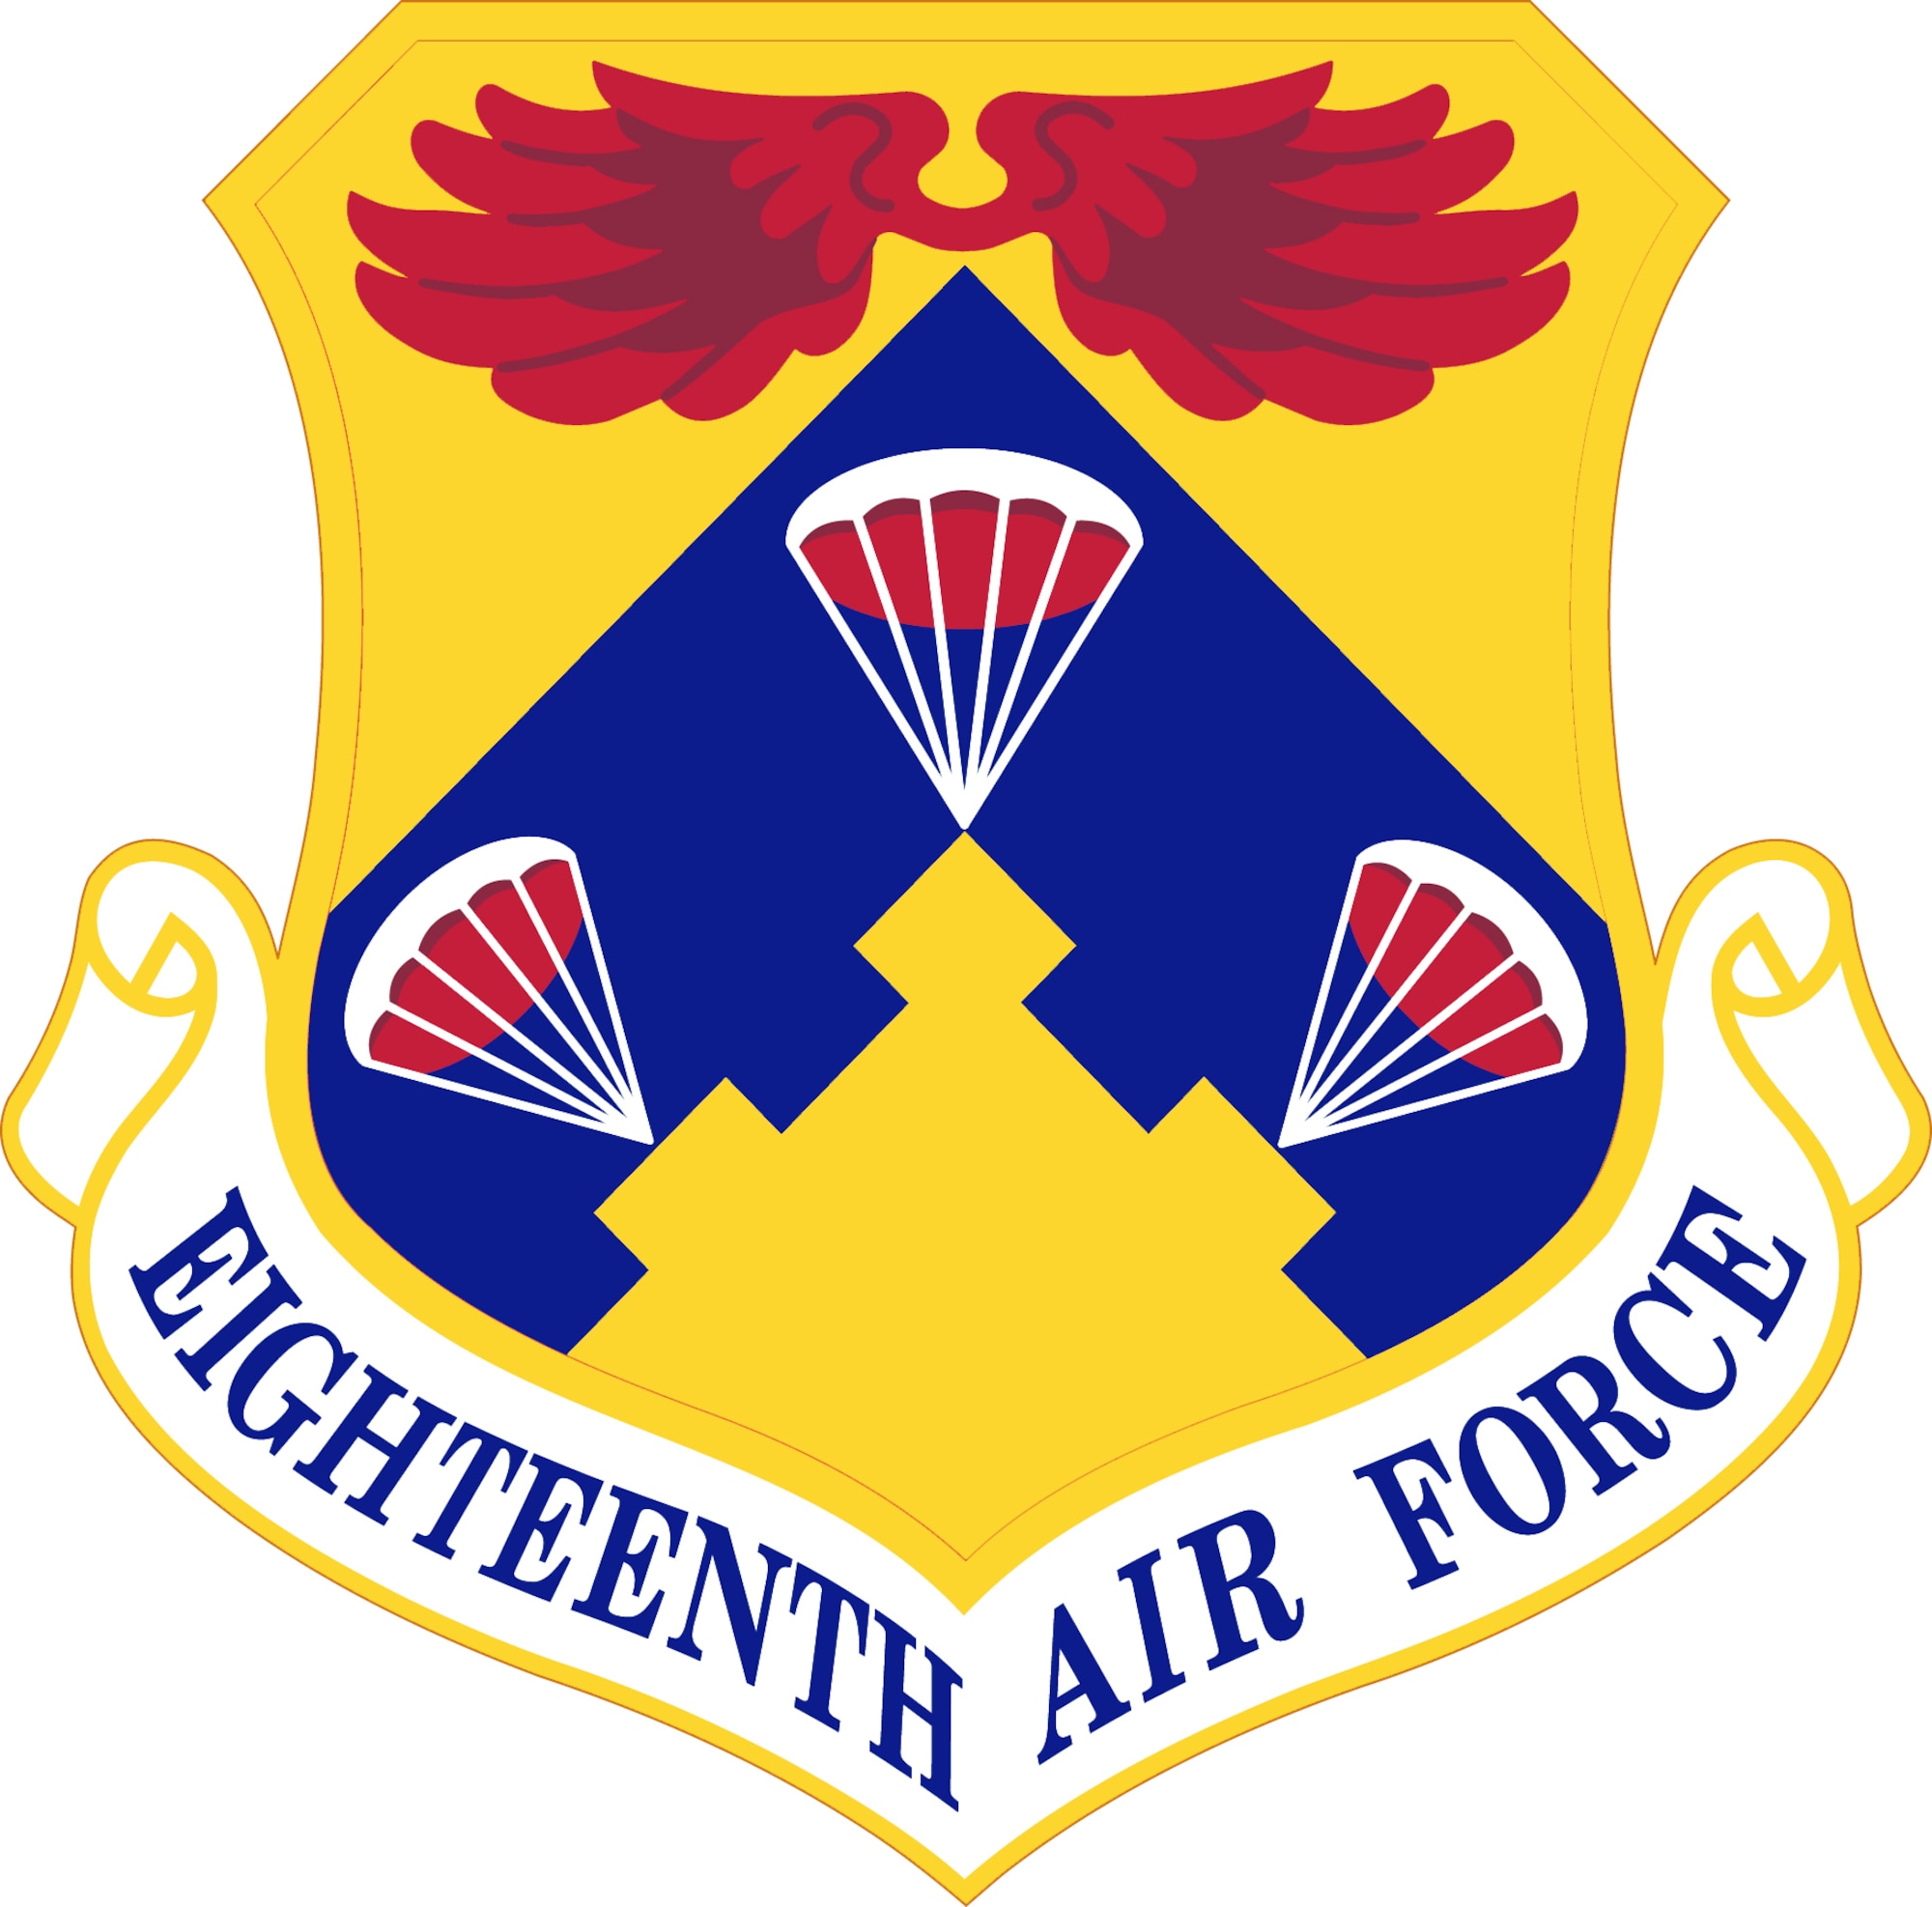 18th Air Force Shield (Color). Image provided by the Air Force Historical Research Agency. In accordance with Chapter 3 of AFI 84-105, commercial reproduction of this emblem is NOT permitted without the permission of the proponent organizational/unit commander. The image is 6x6 inches @ 300 ppi.